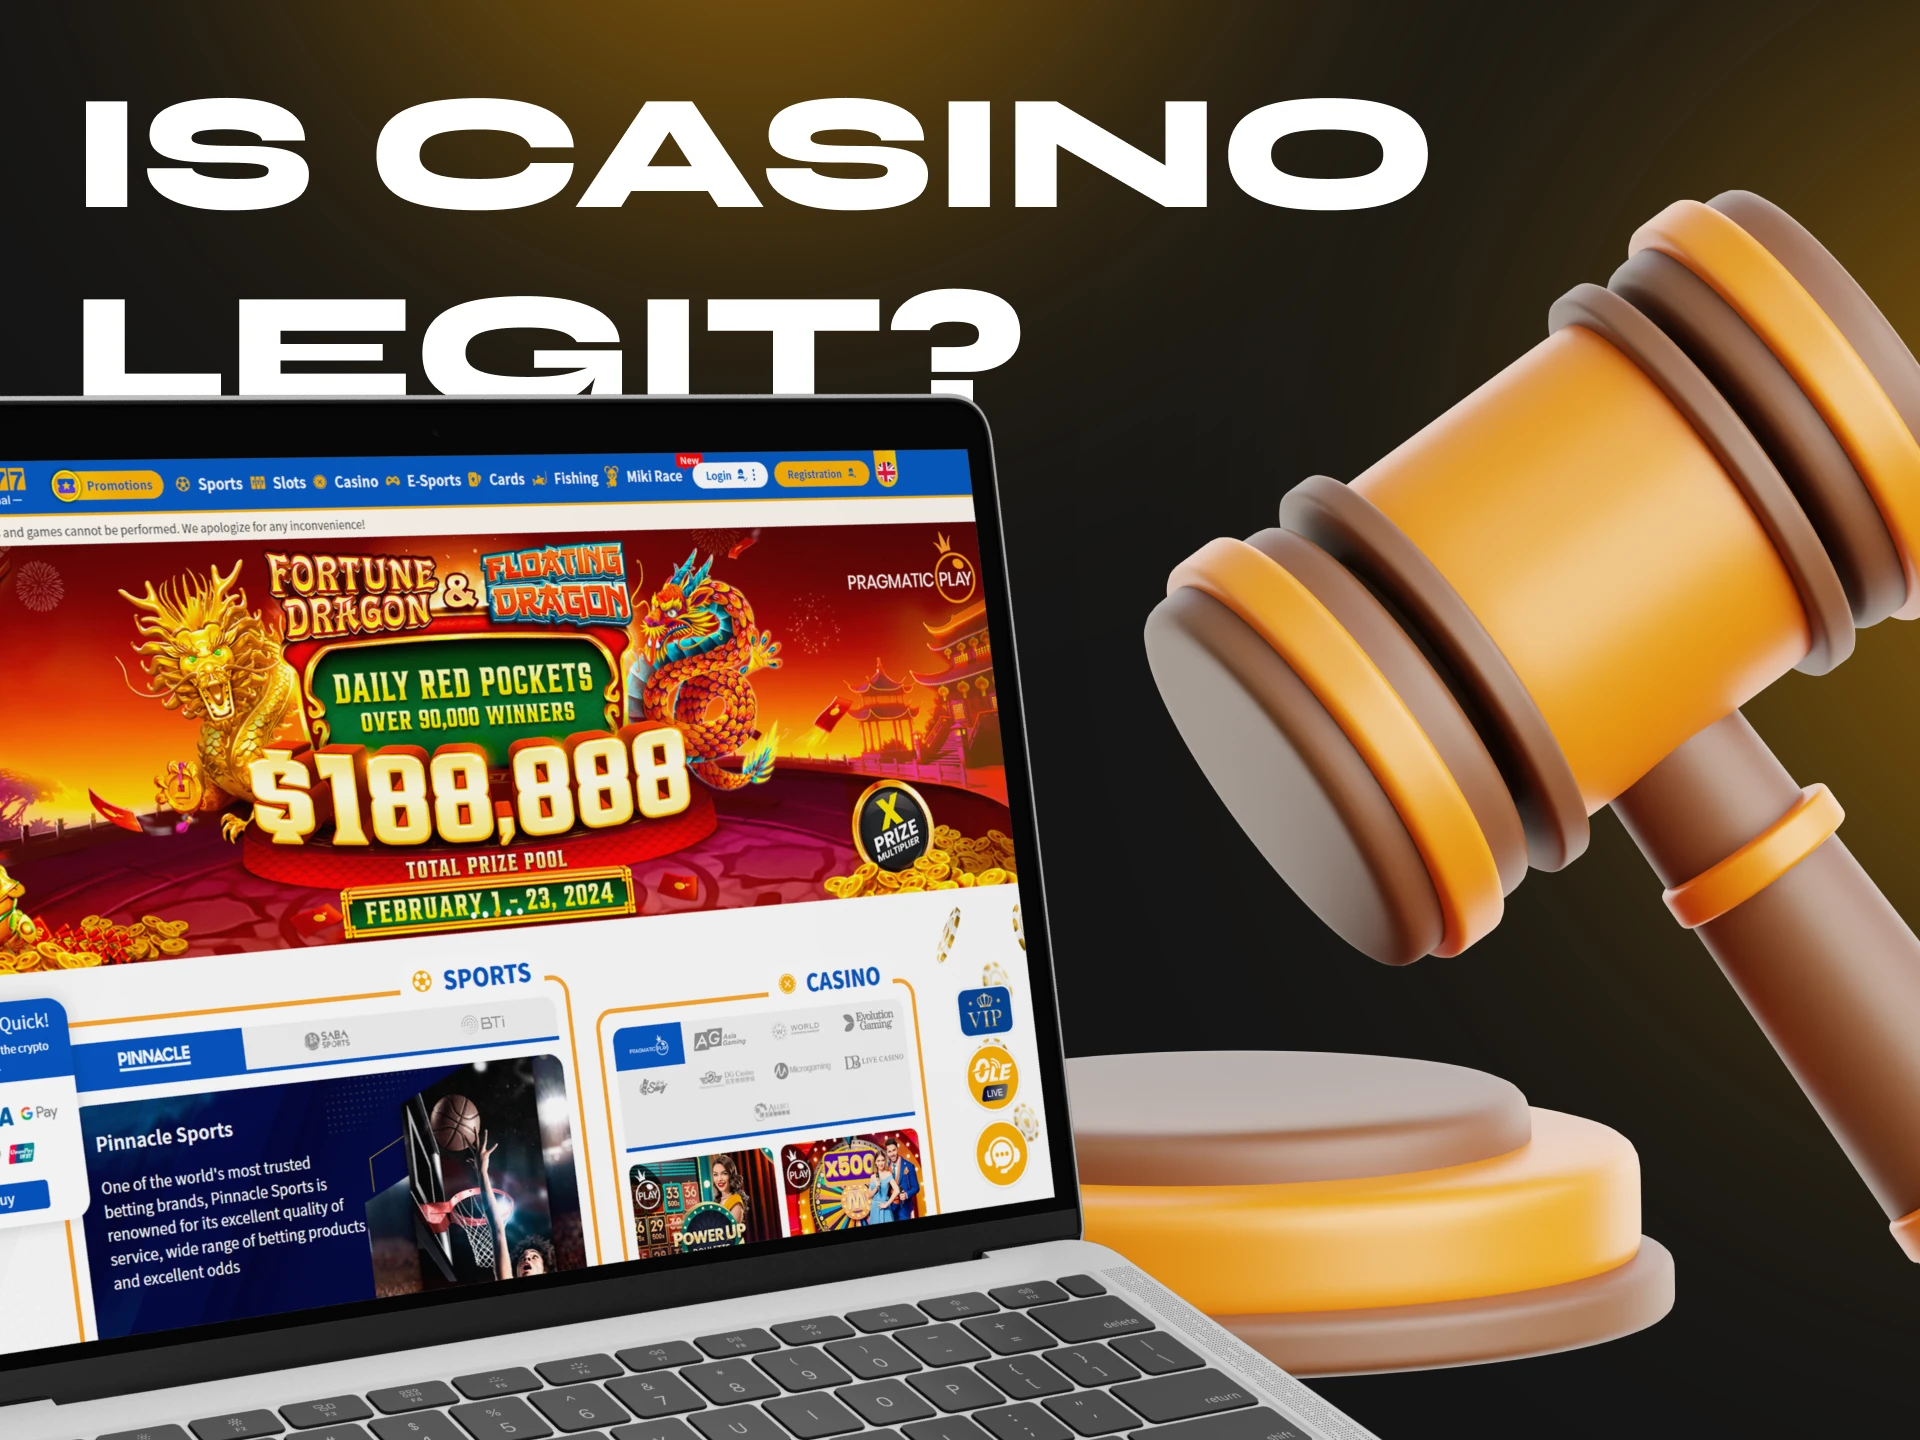 You can play legally at Ole777 casino.